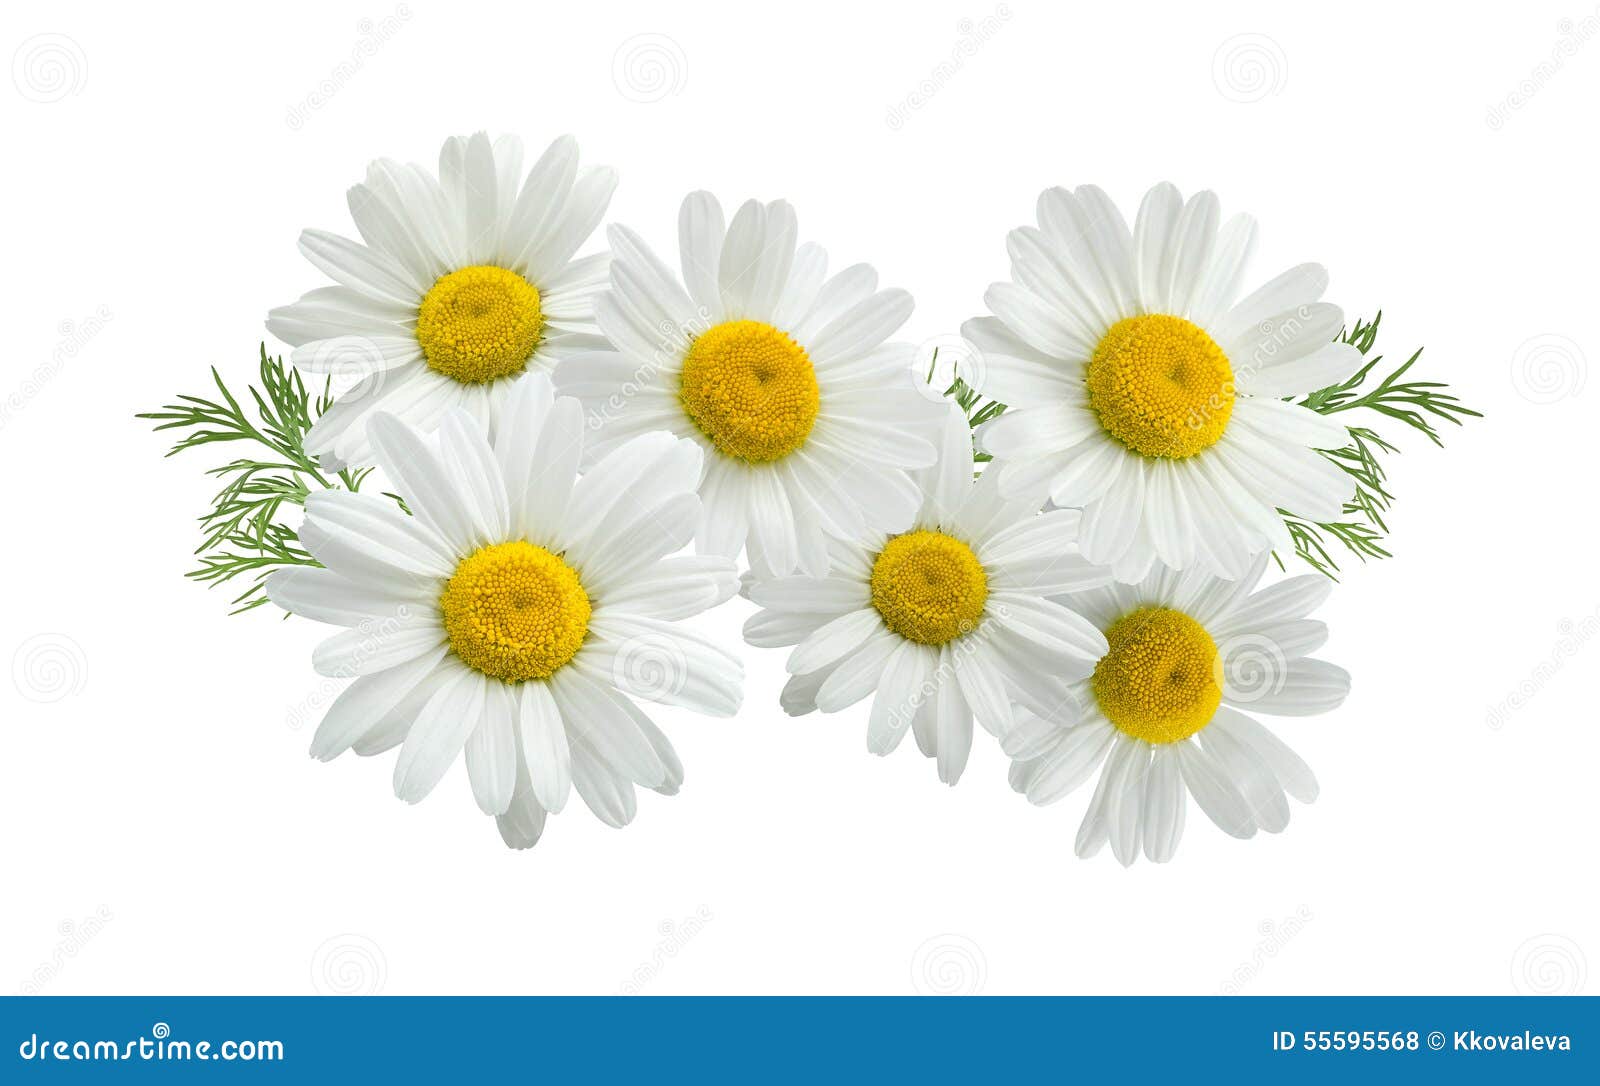 camomile group long  on white